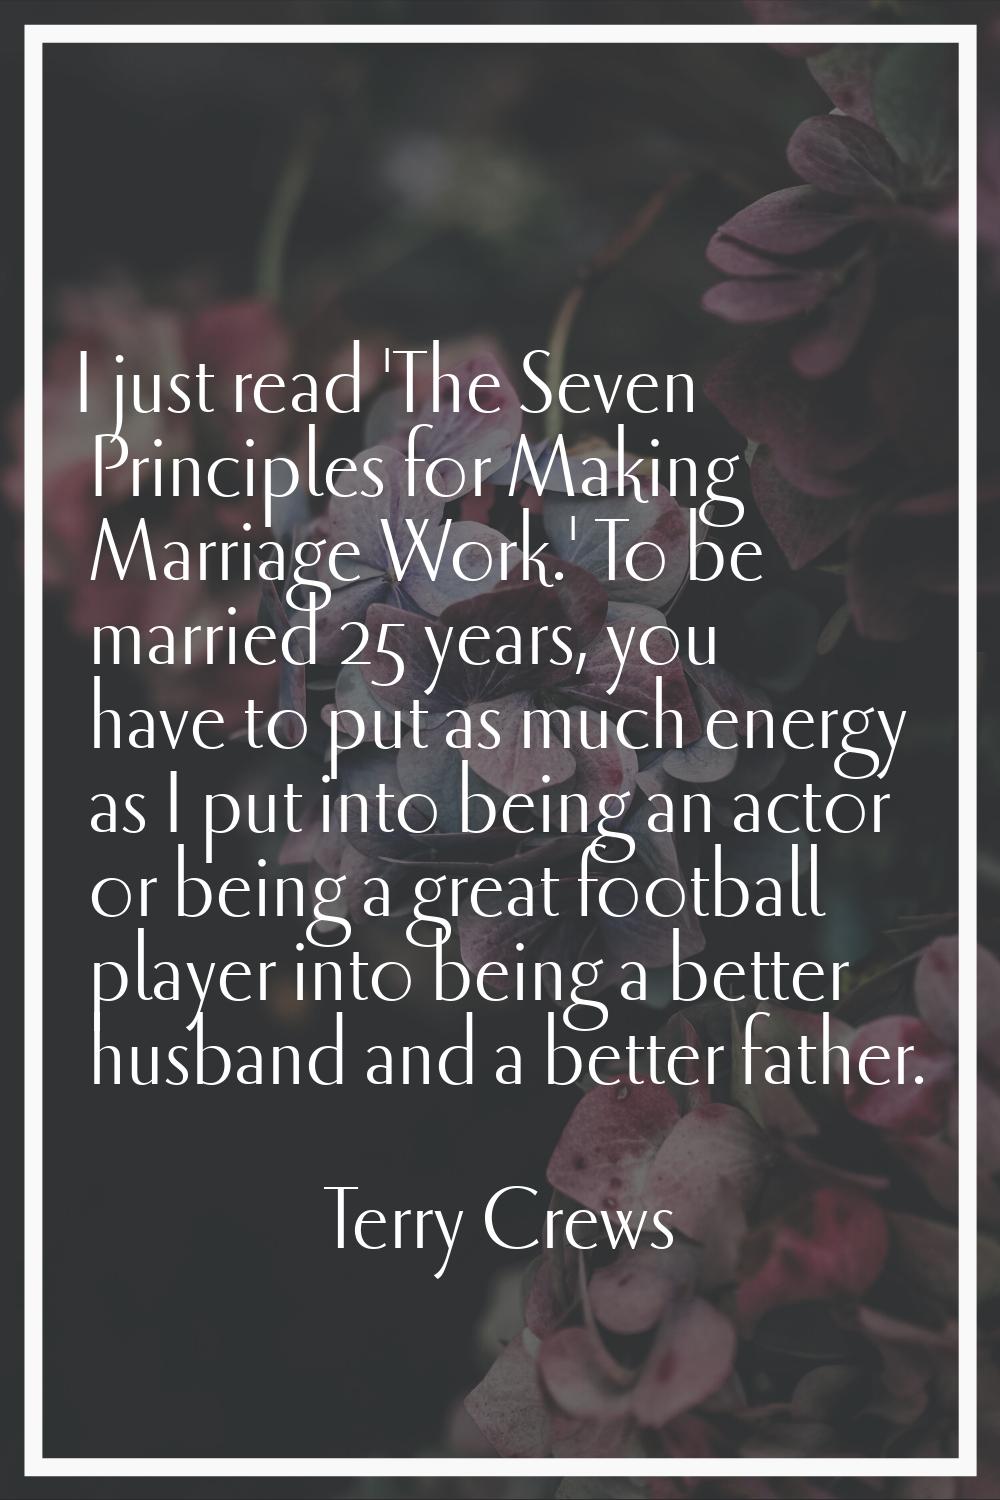 I just read 'The Seven Principles for Making Marriage Work.' To be married 25 years, you have to pu